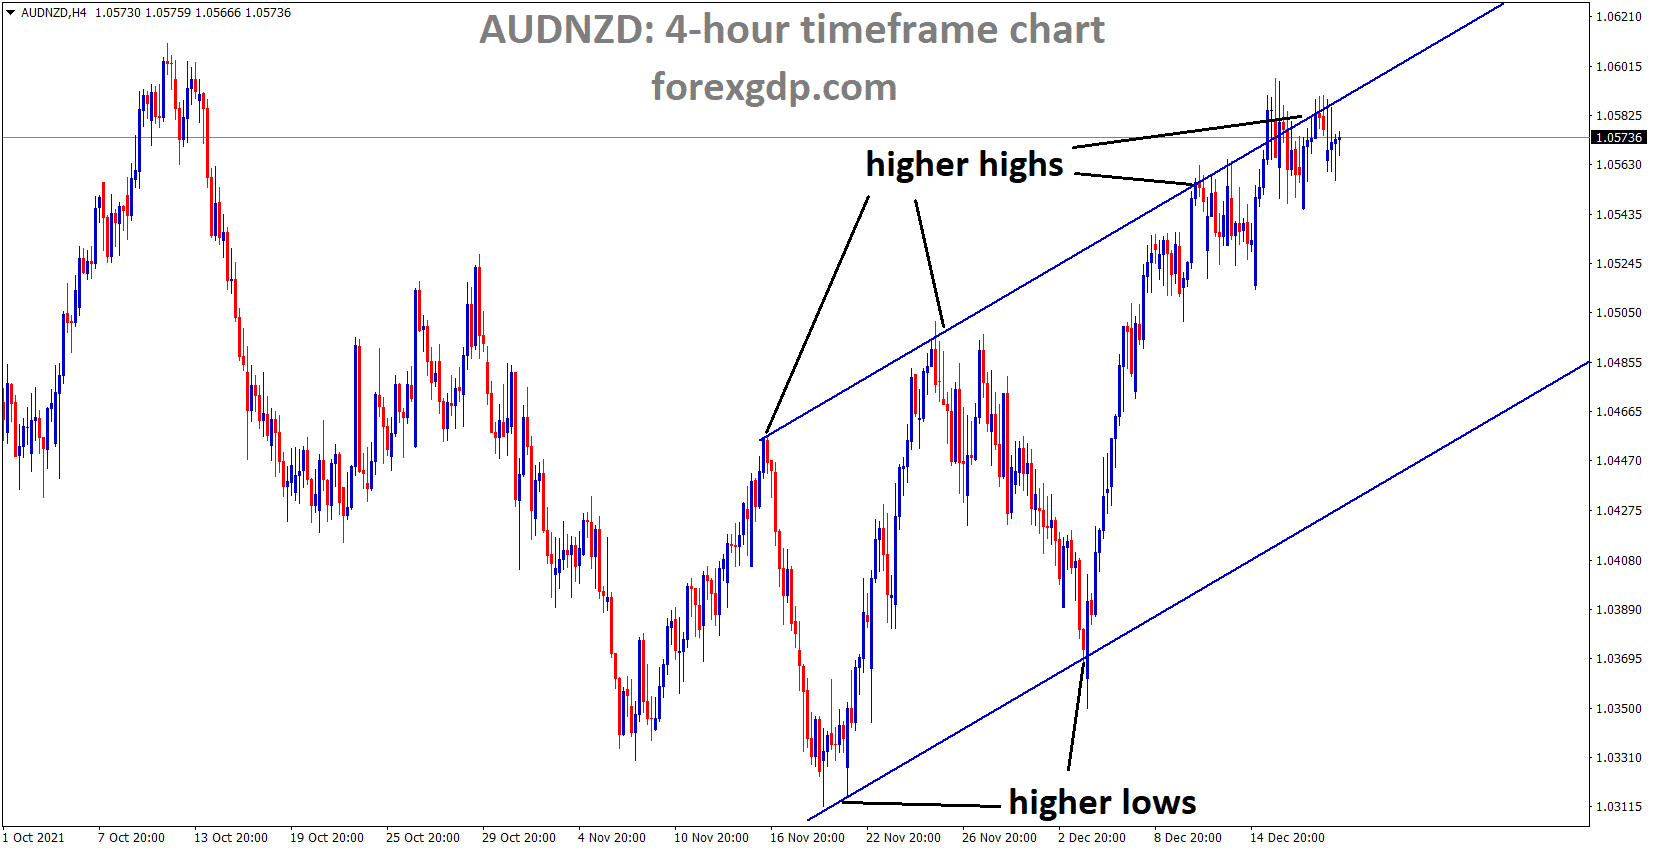 AUDNZD is moving in an Ascending channel and the market has reached the higher high